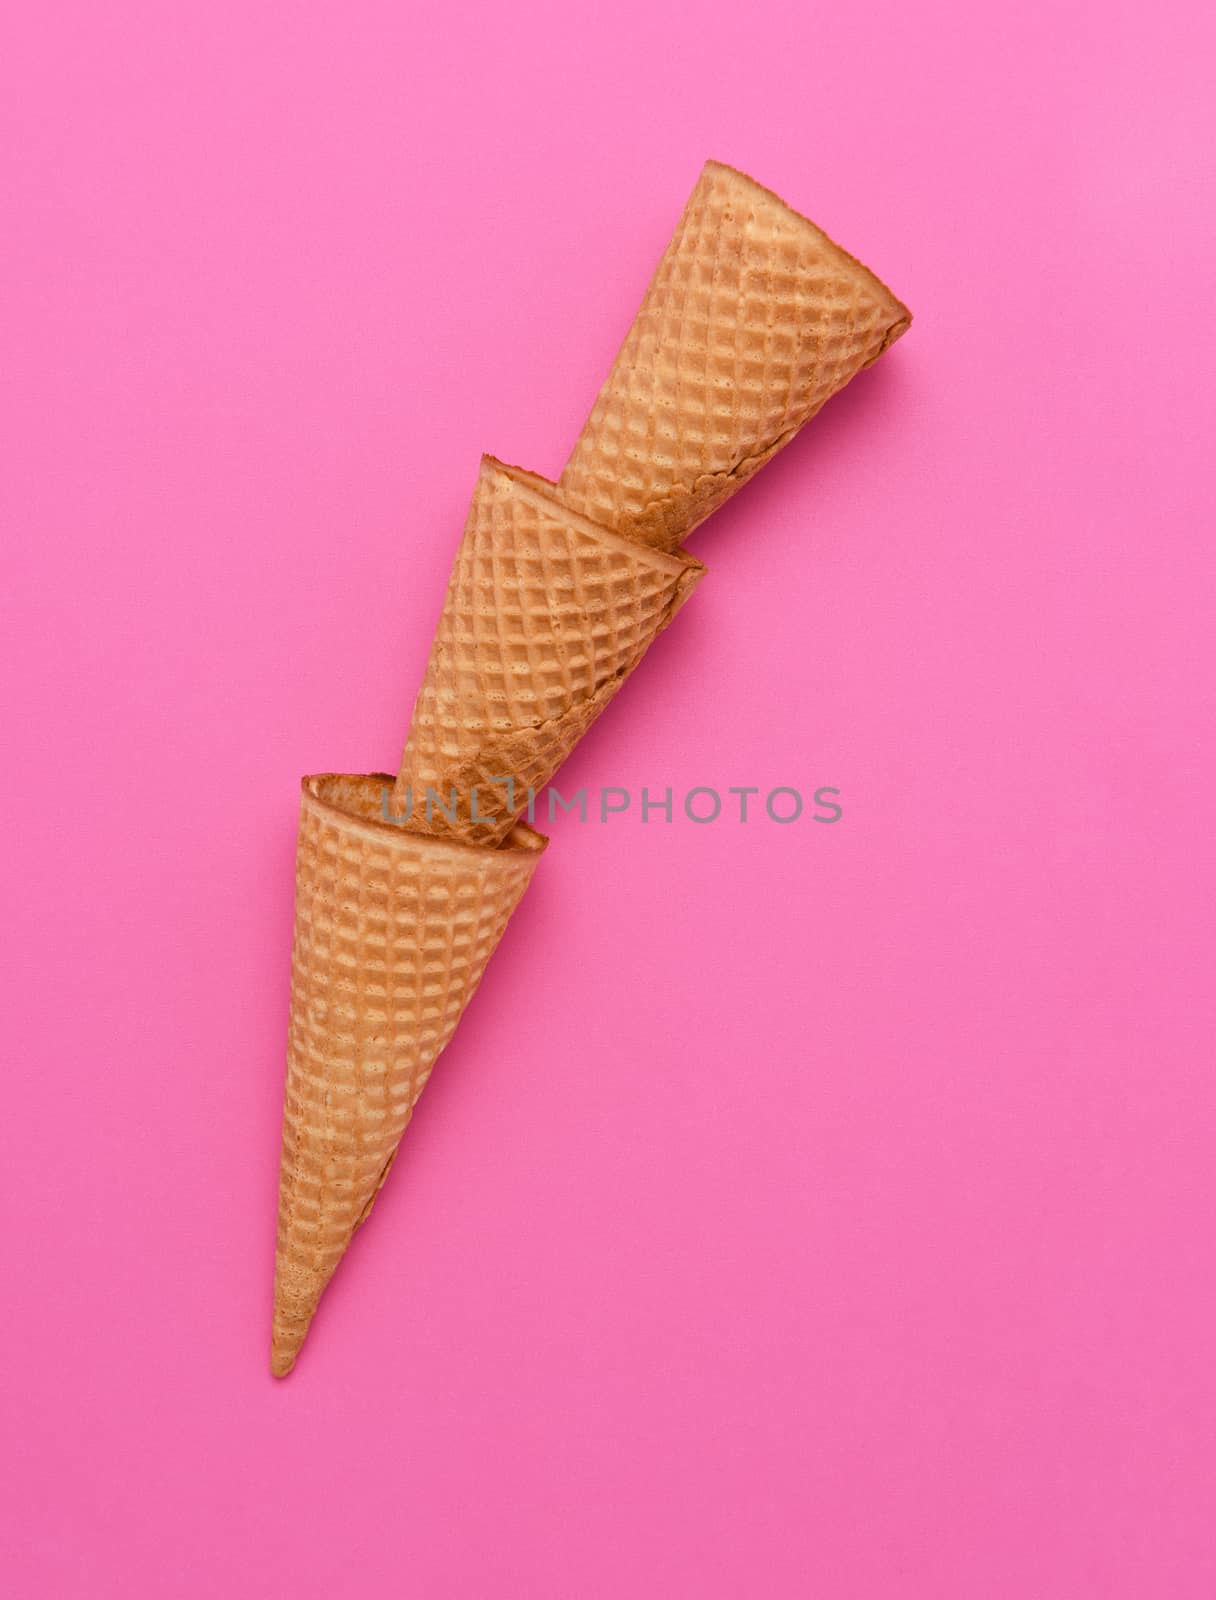 Three nested ice cream cones on a pink background. Flat lay minimalist styling. 